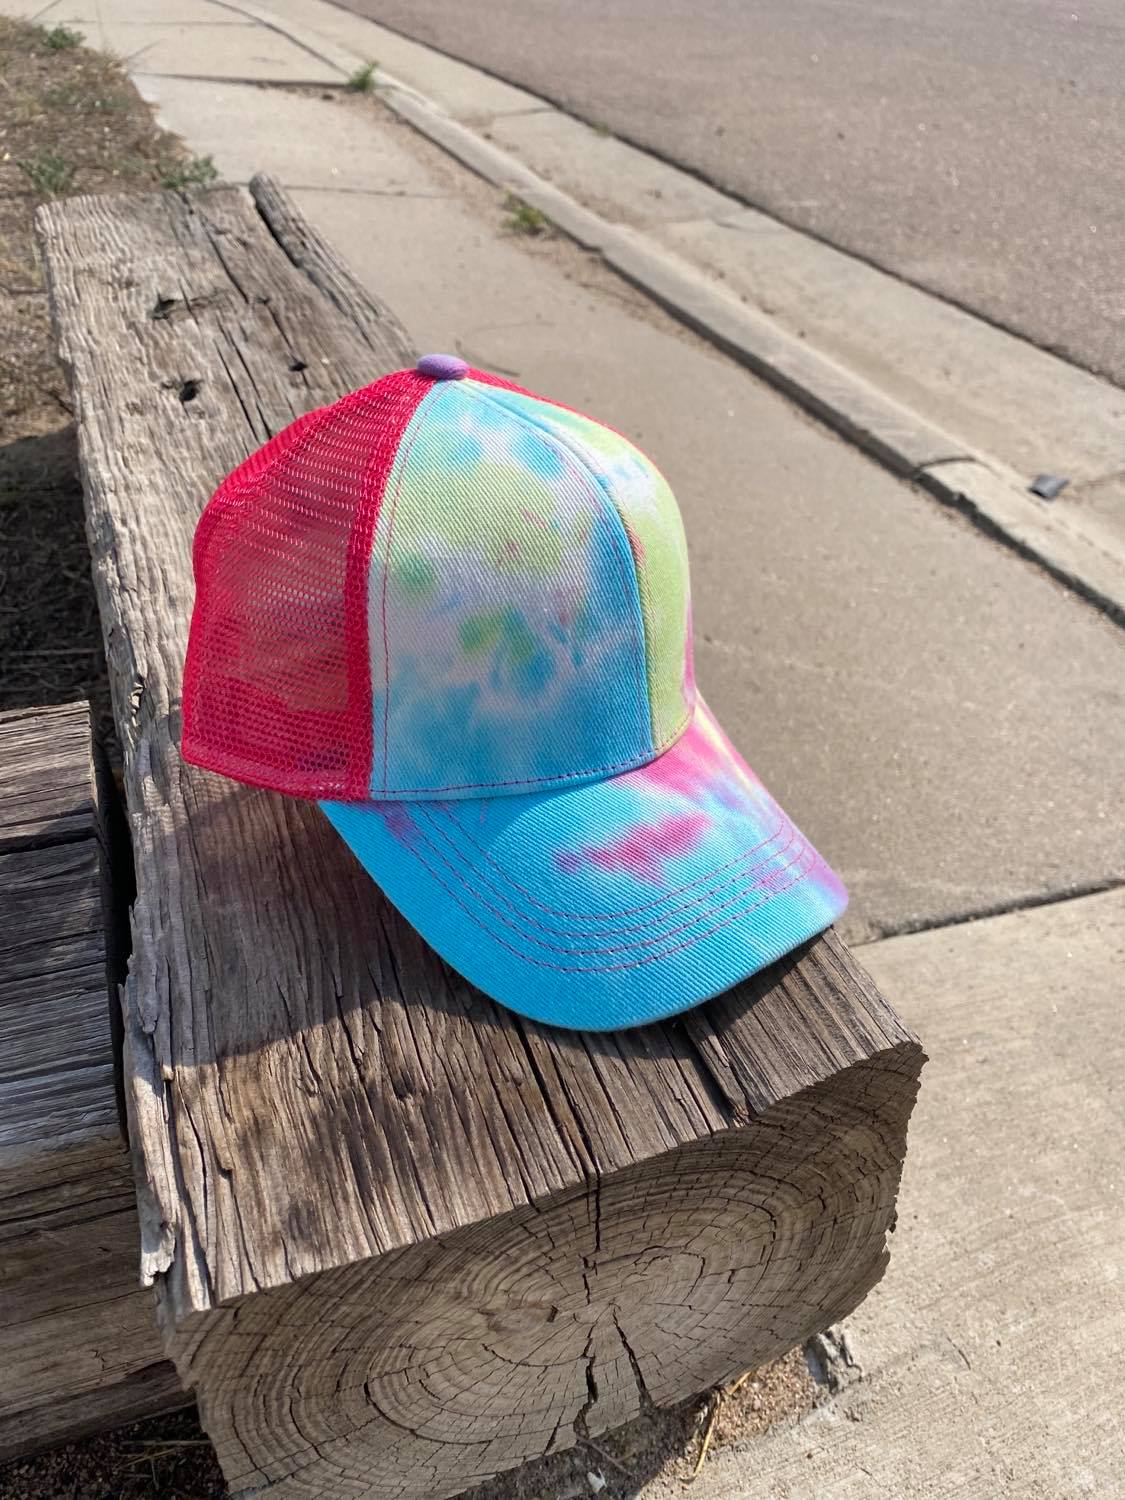 Blue, Green, and Pink Tie Dye Ball Cap Hat